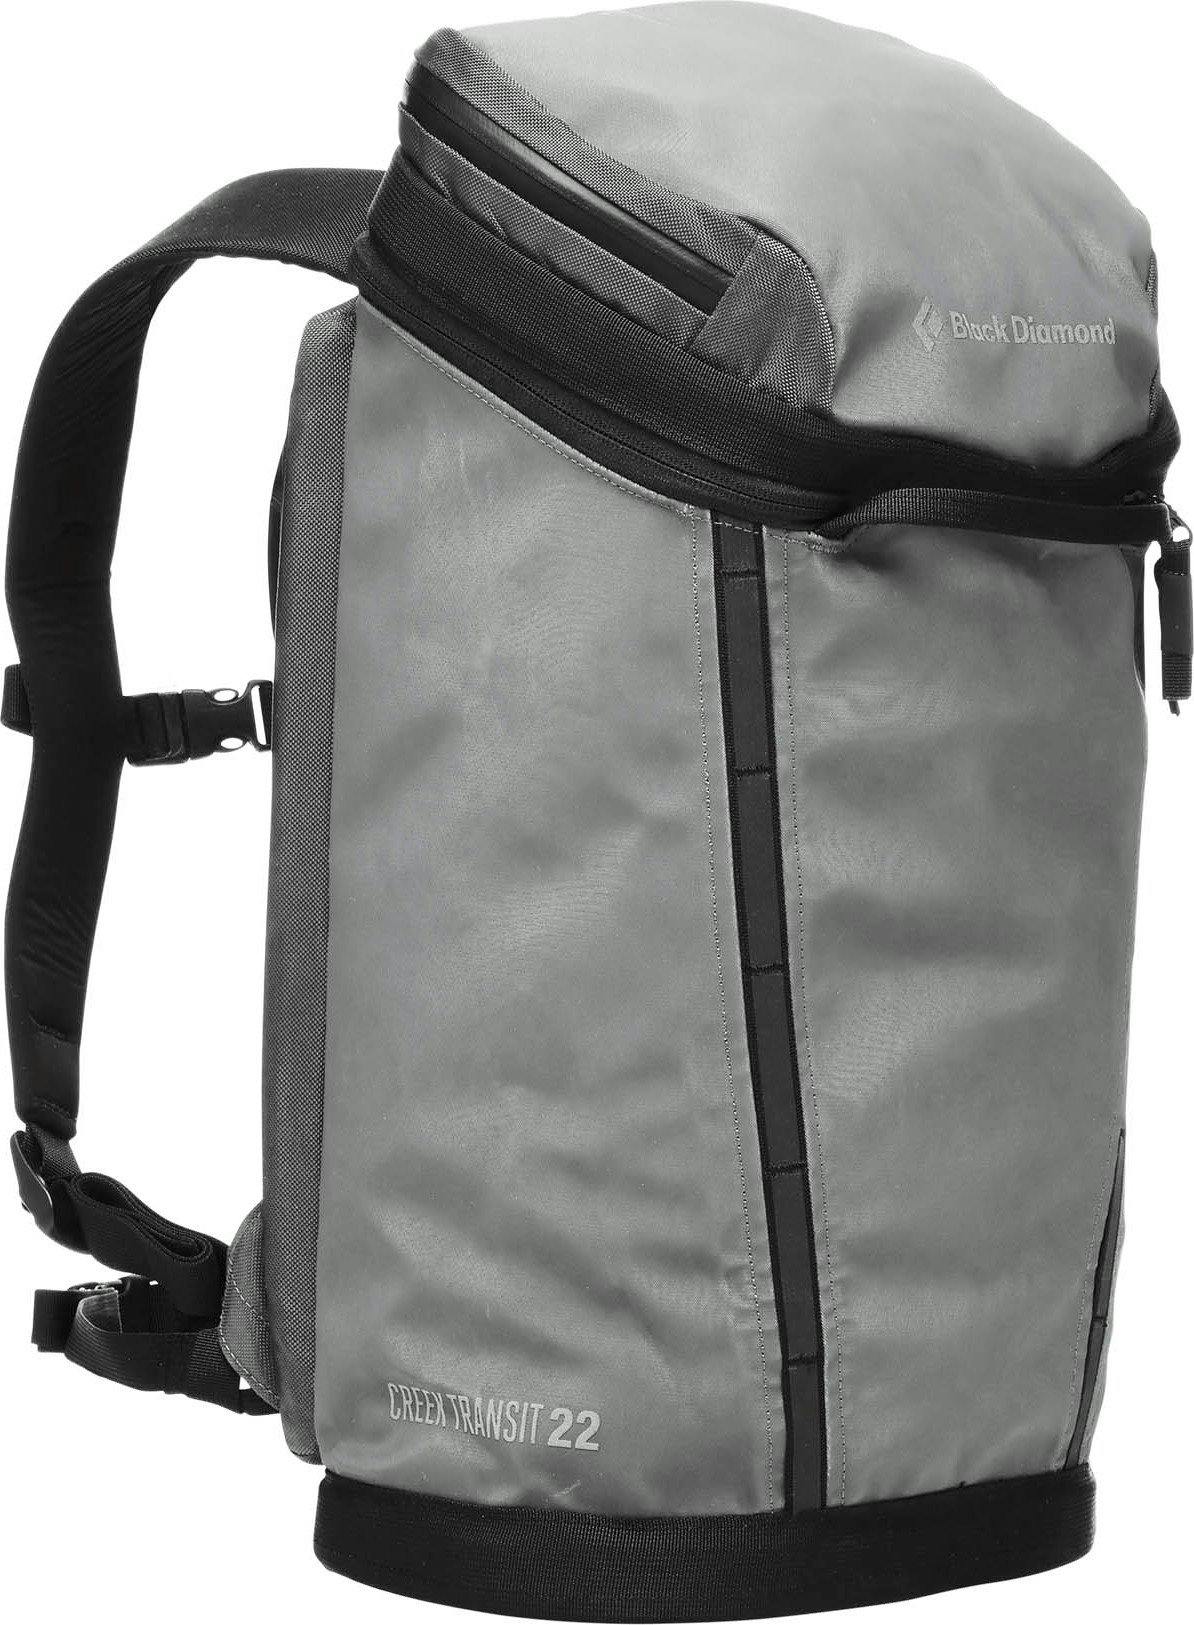 Product image for Creek Transit Backpack 22L